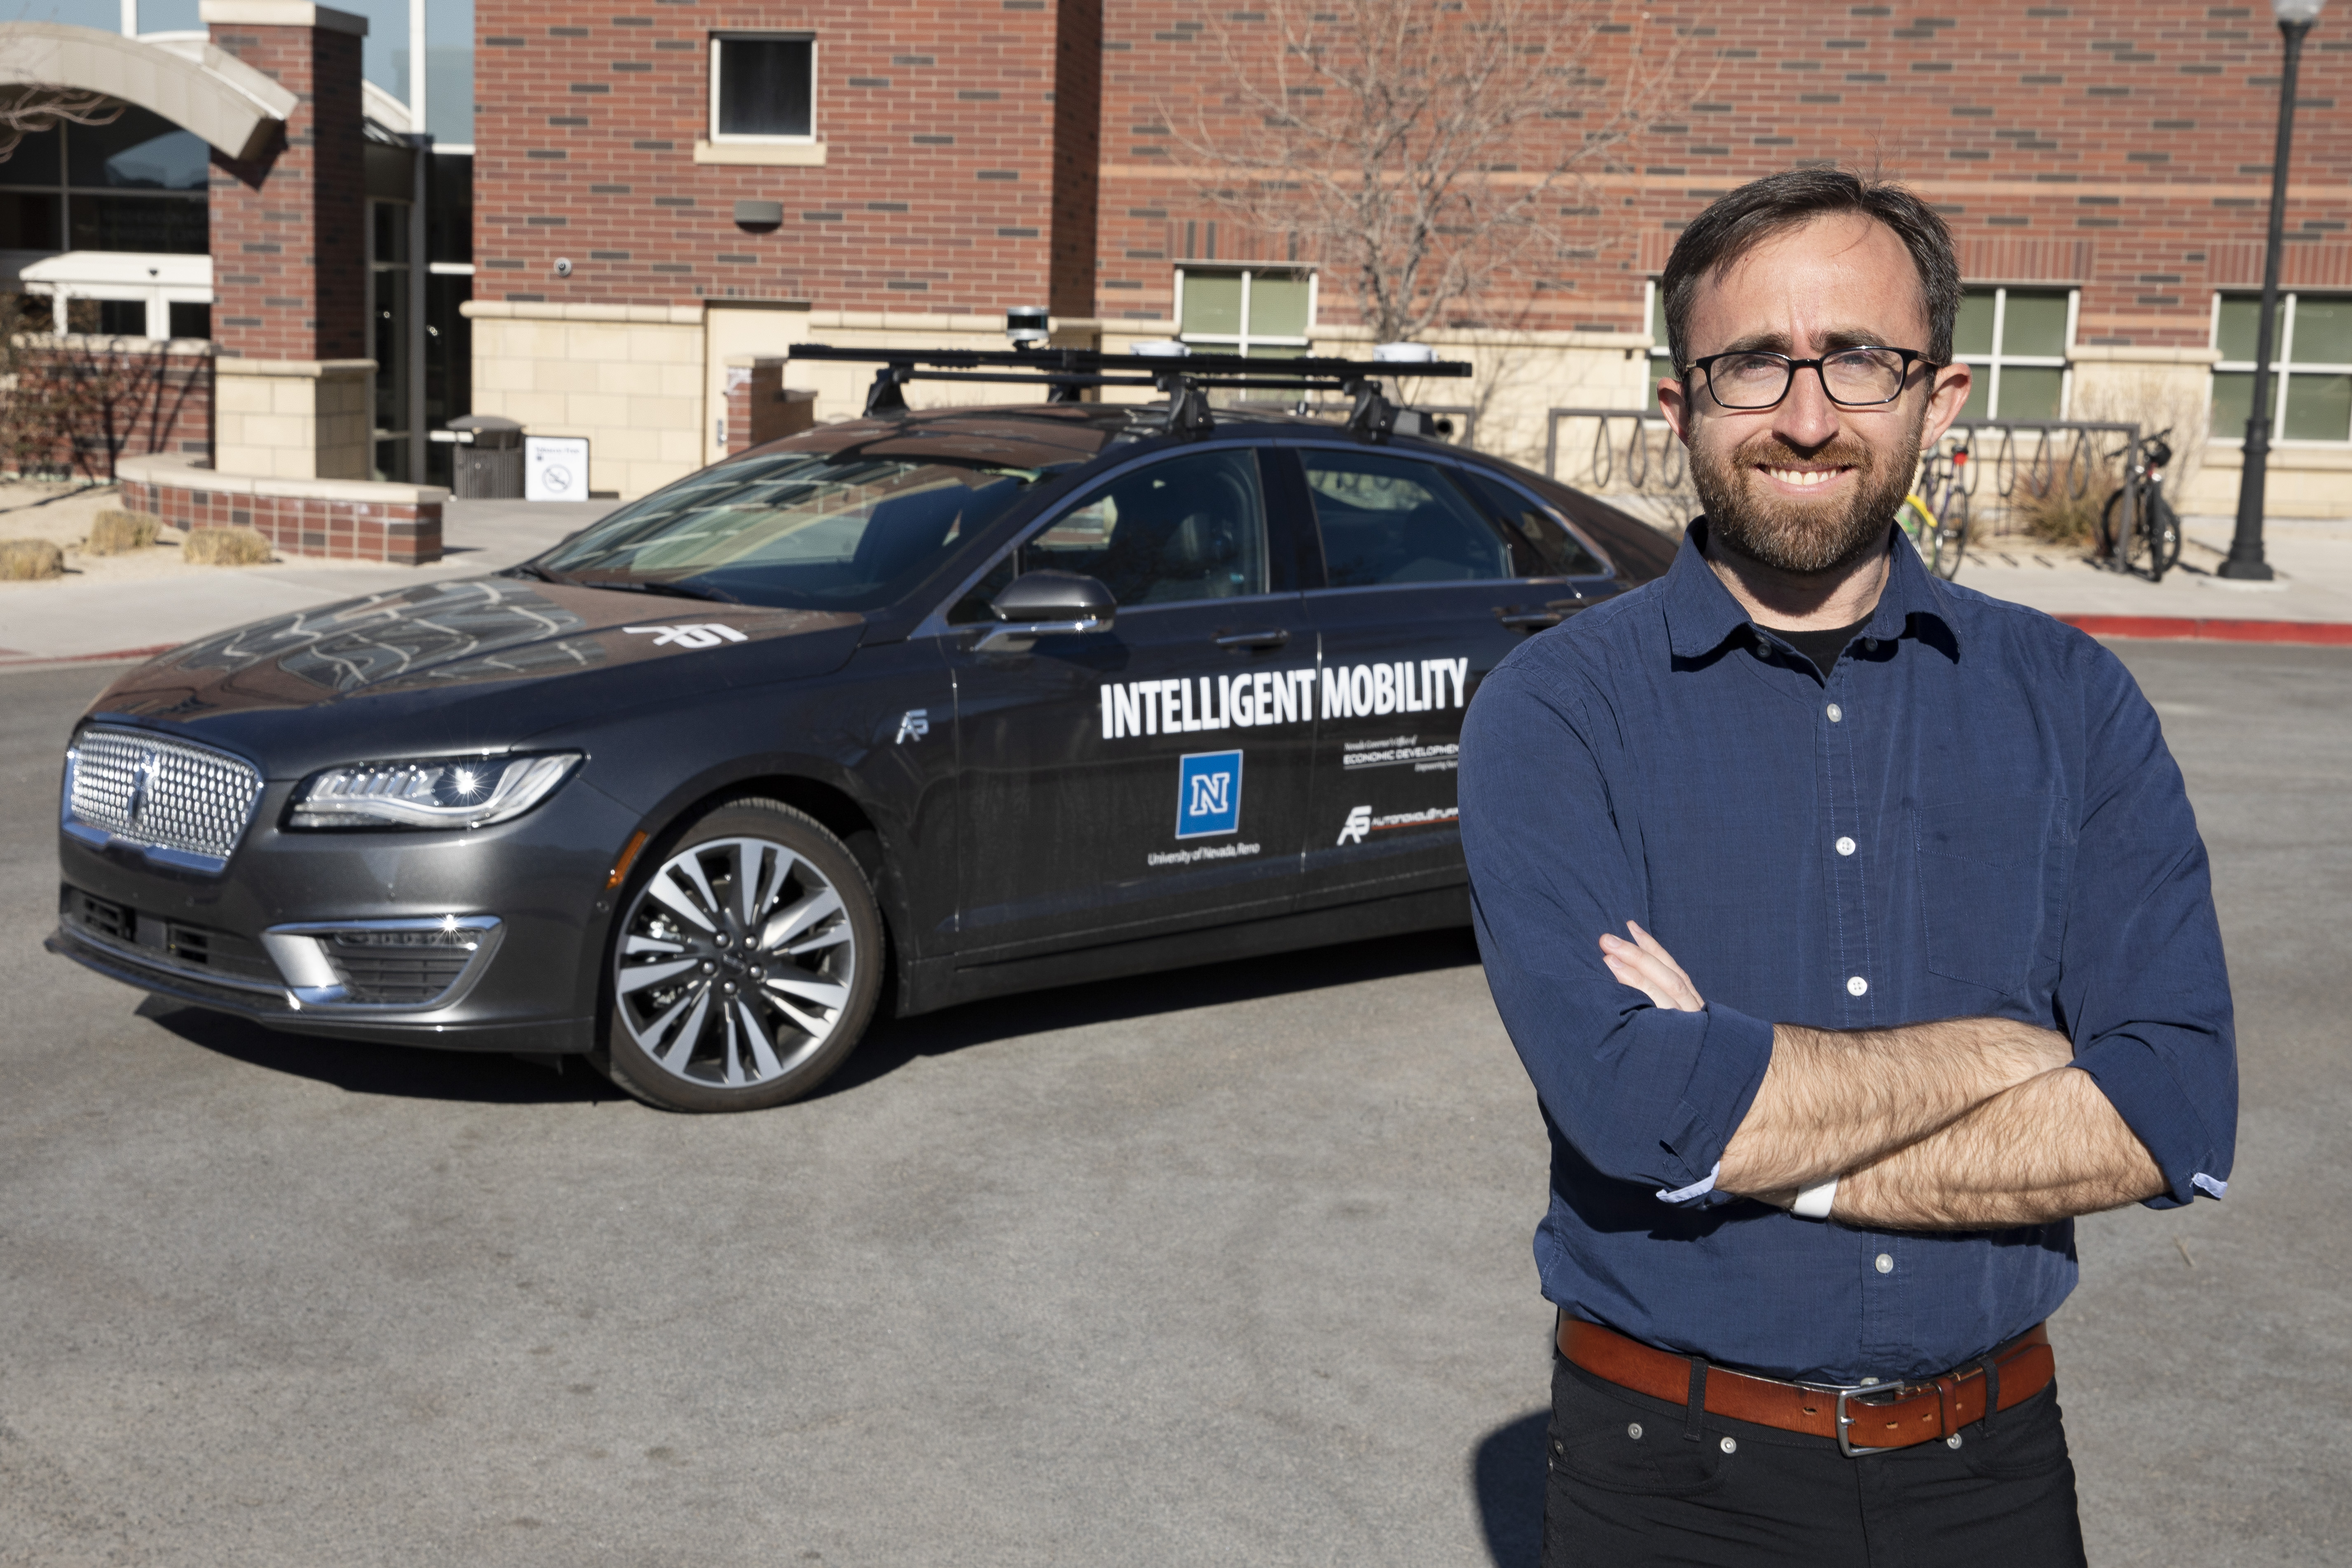 An image of Richard Kelley standing in front of a self-driving car.